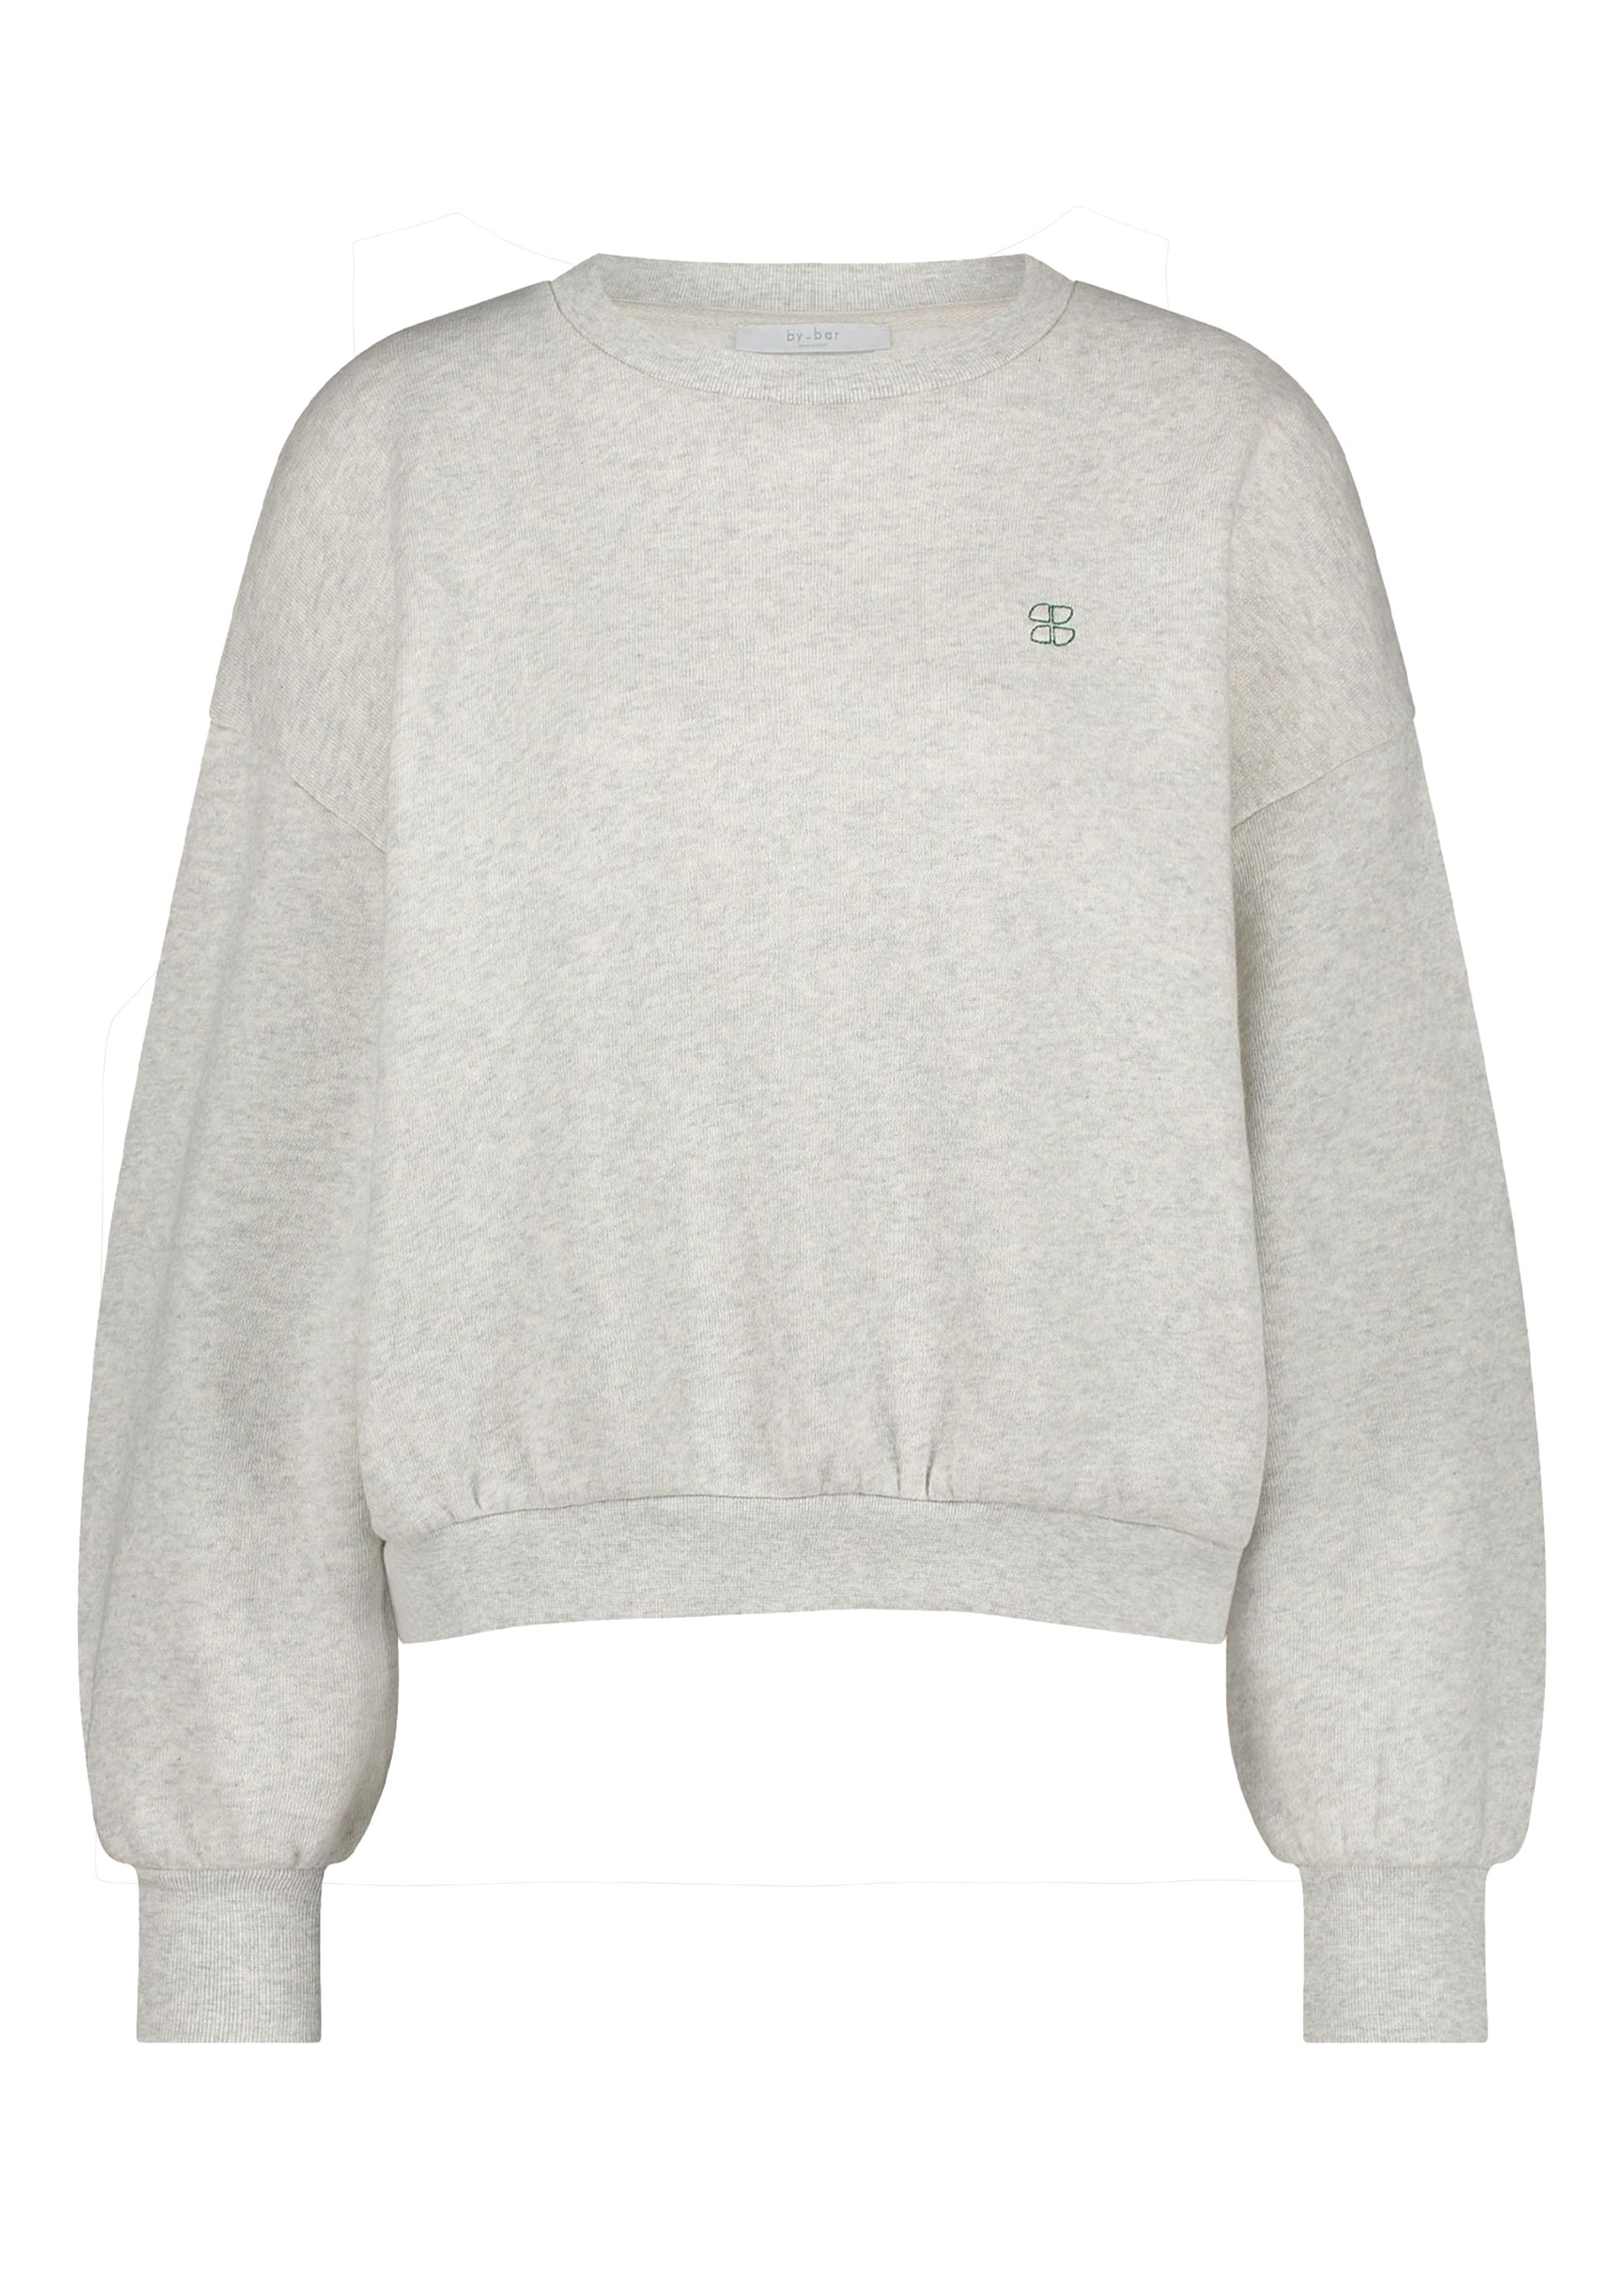 BY-BAR SWEATER